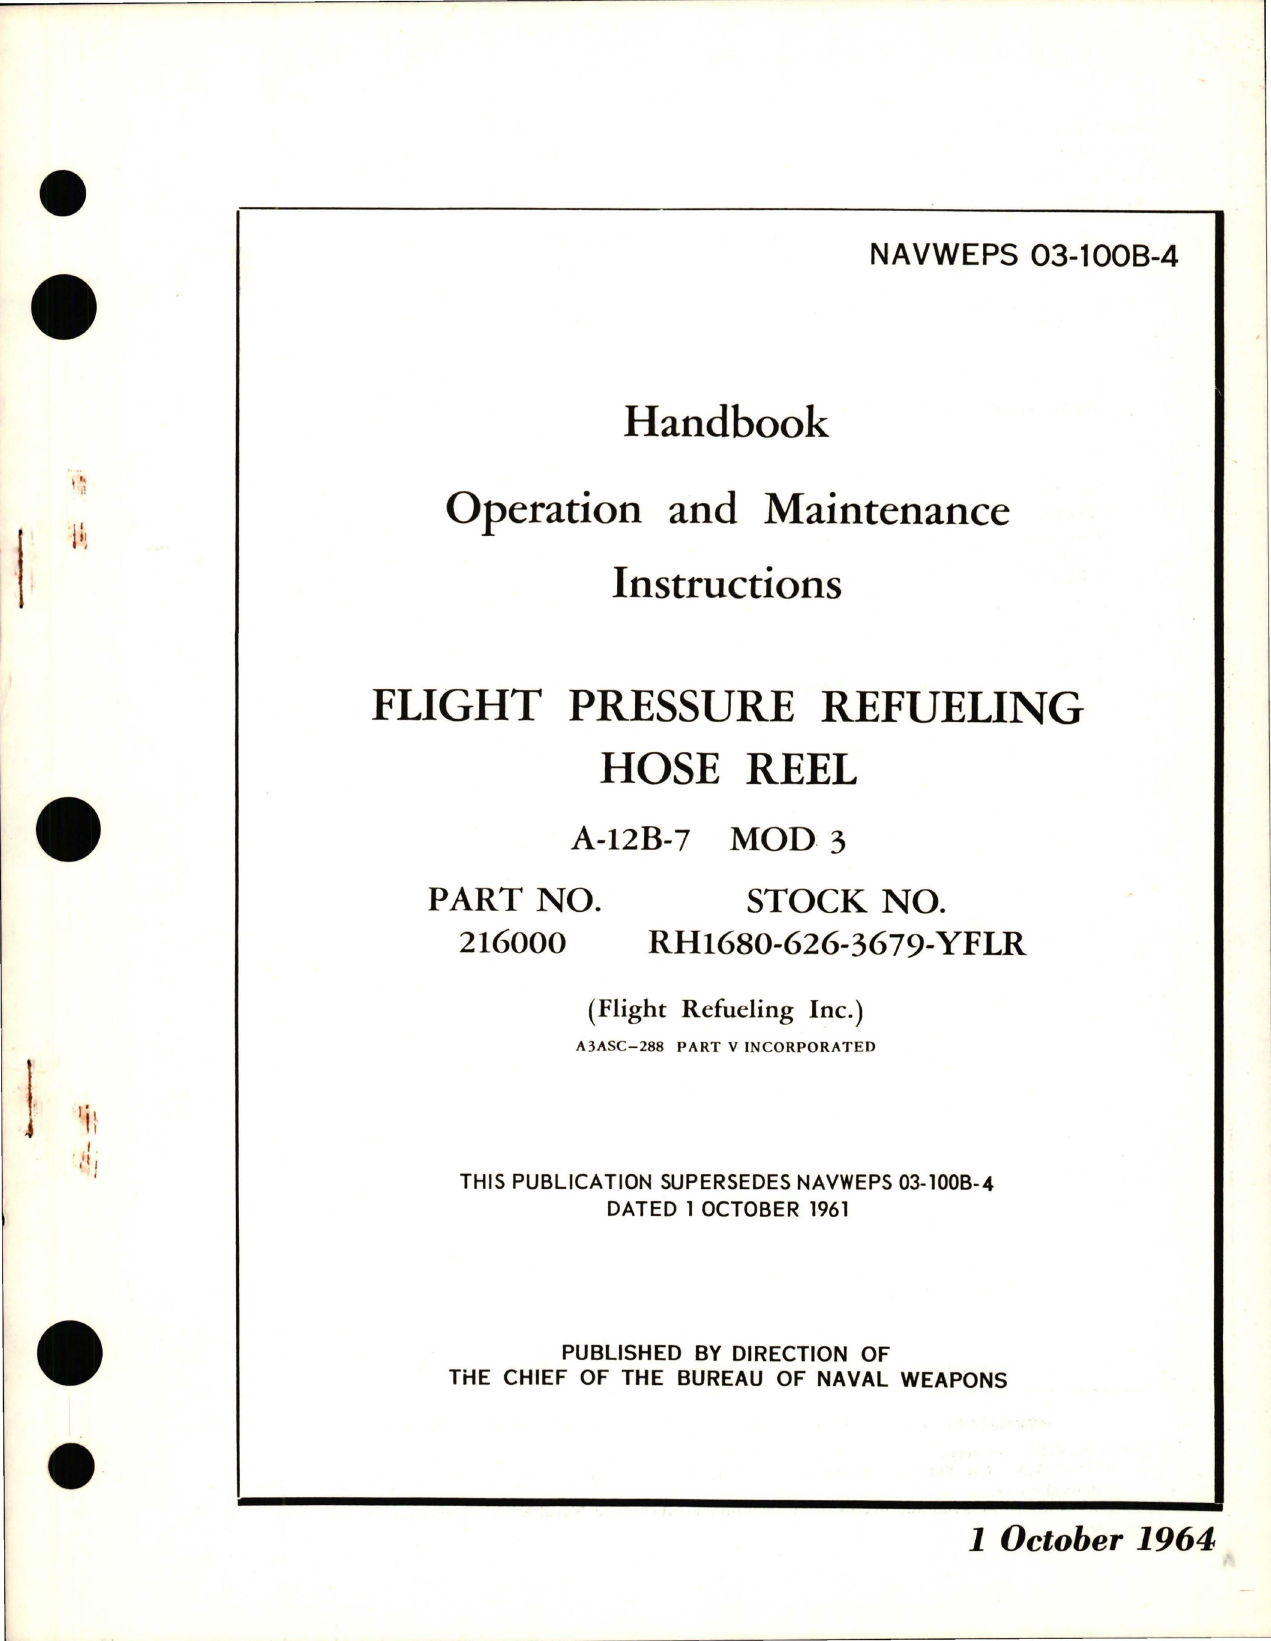 Sample page 1 from AirCorps Library document: Operation and Maintenance Instructions for Flight Pressure Refueling Hose Reel - A-12B-7 - Mod 3 - Part 216000